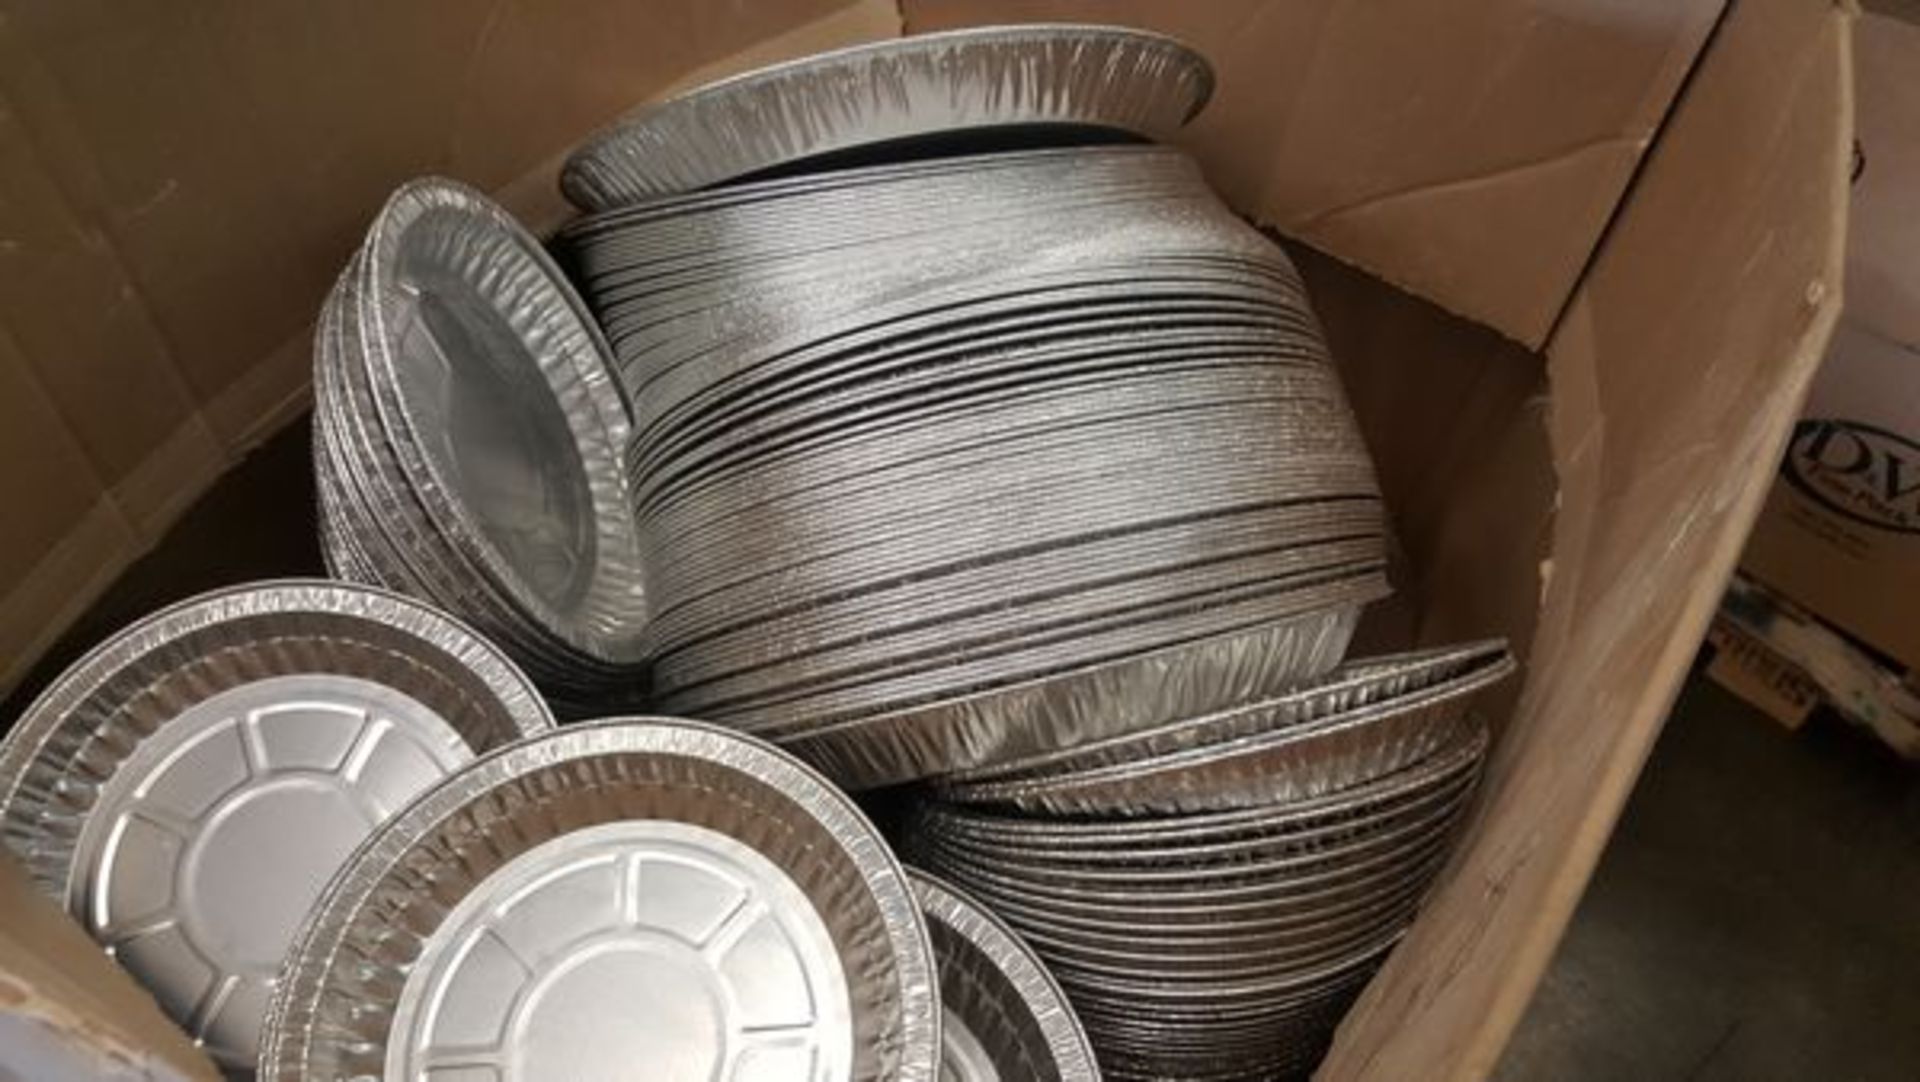 Lot of assorted various size pie tins, plastic muffin trays, clear plastic bags, approx. 35 pallets - Image 5 of 11